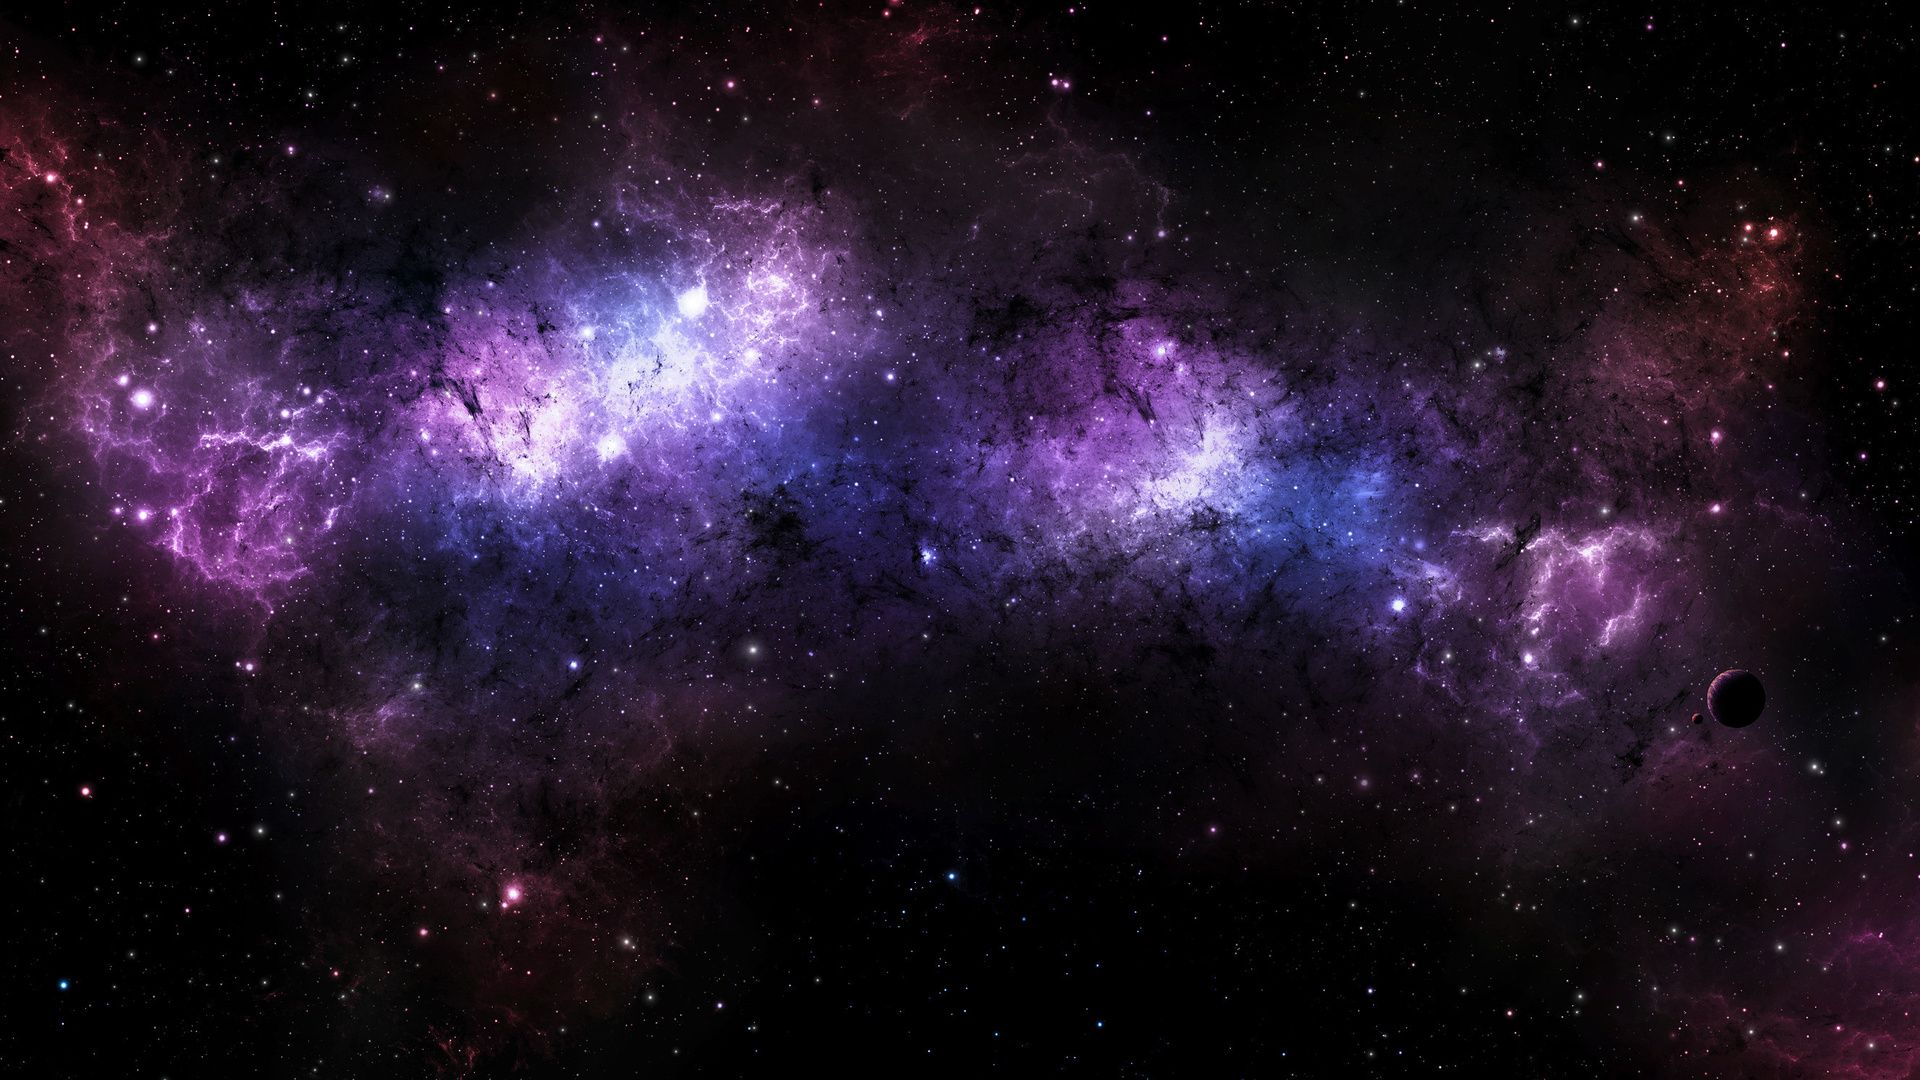 Space Universe Wallpapers HD - Pics about space